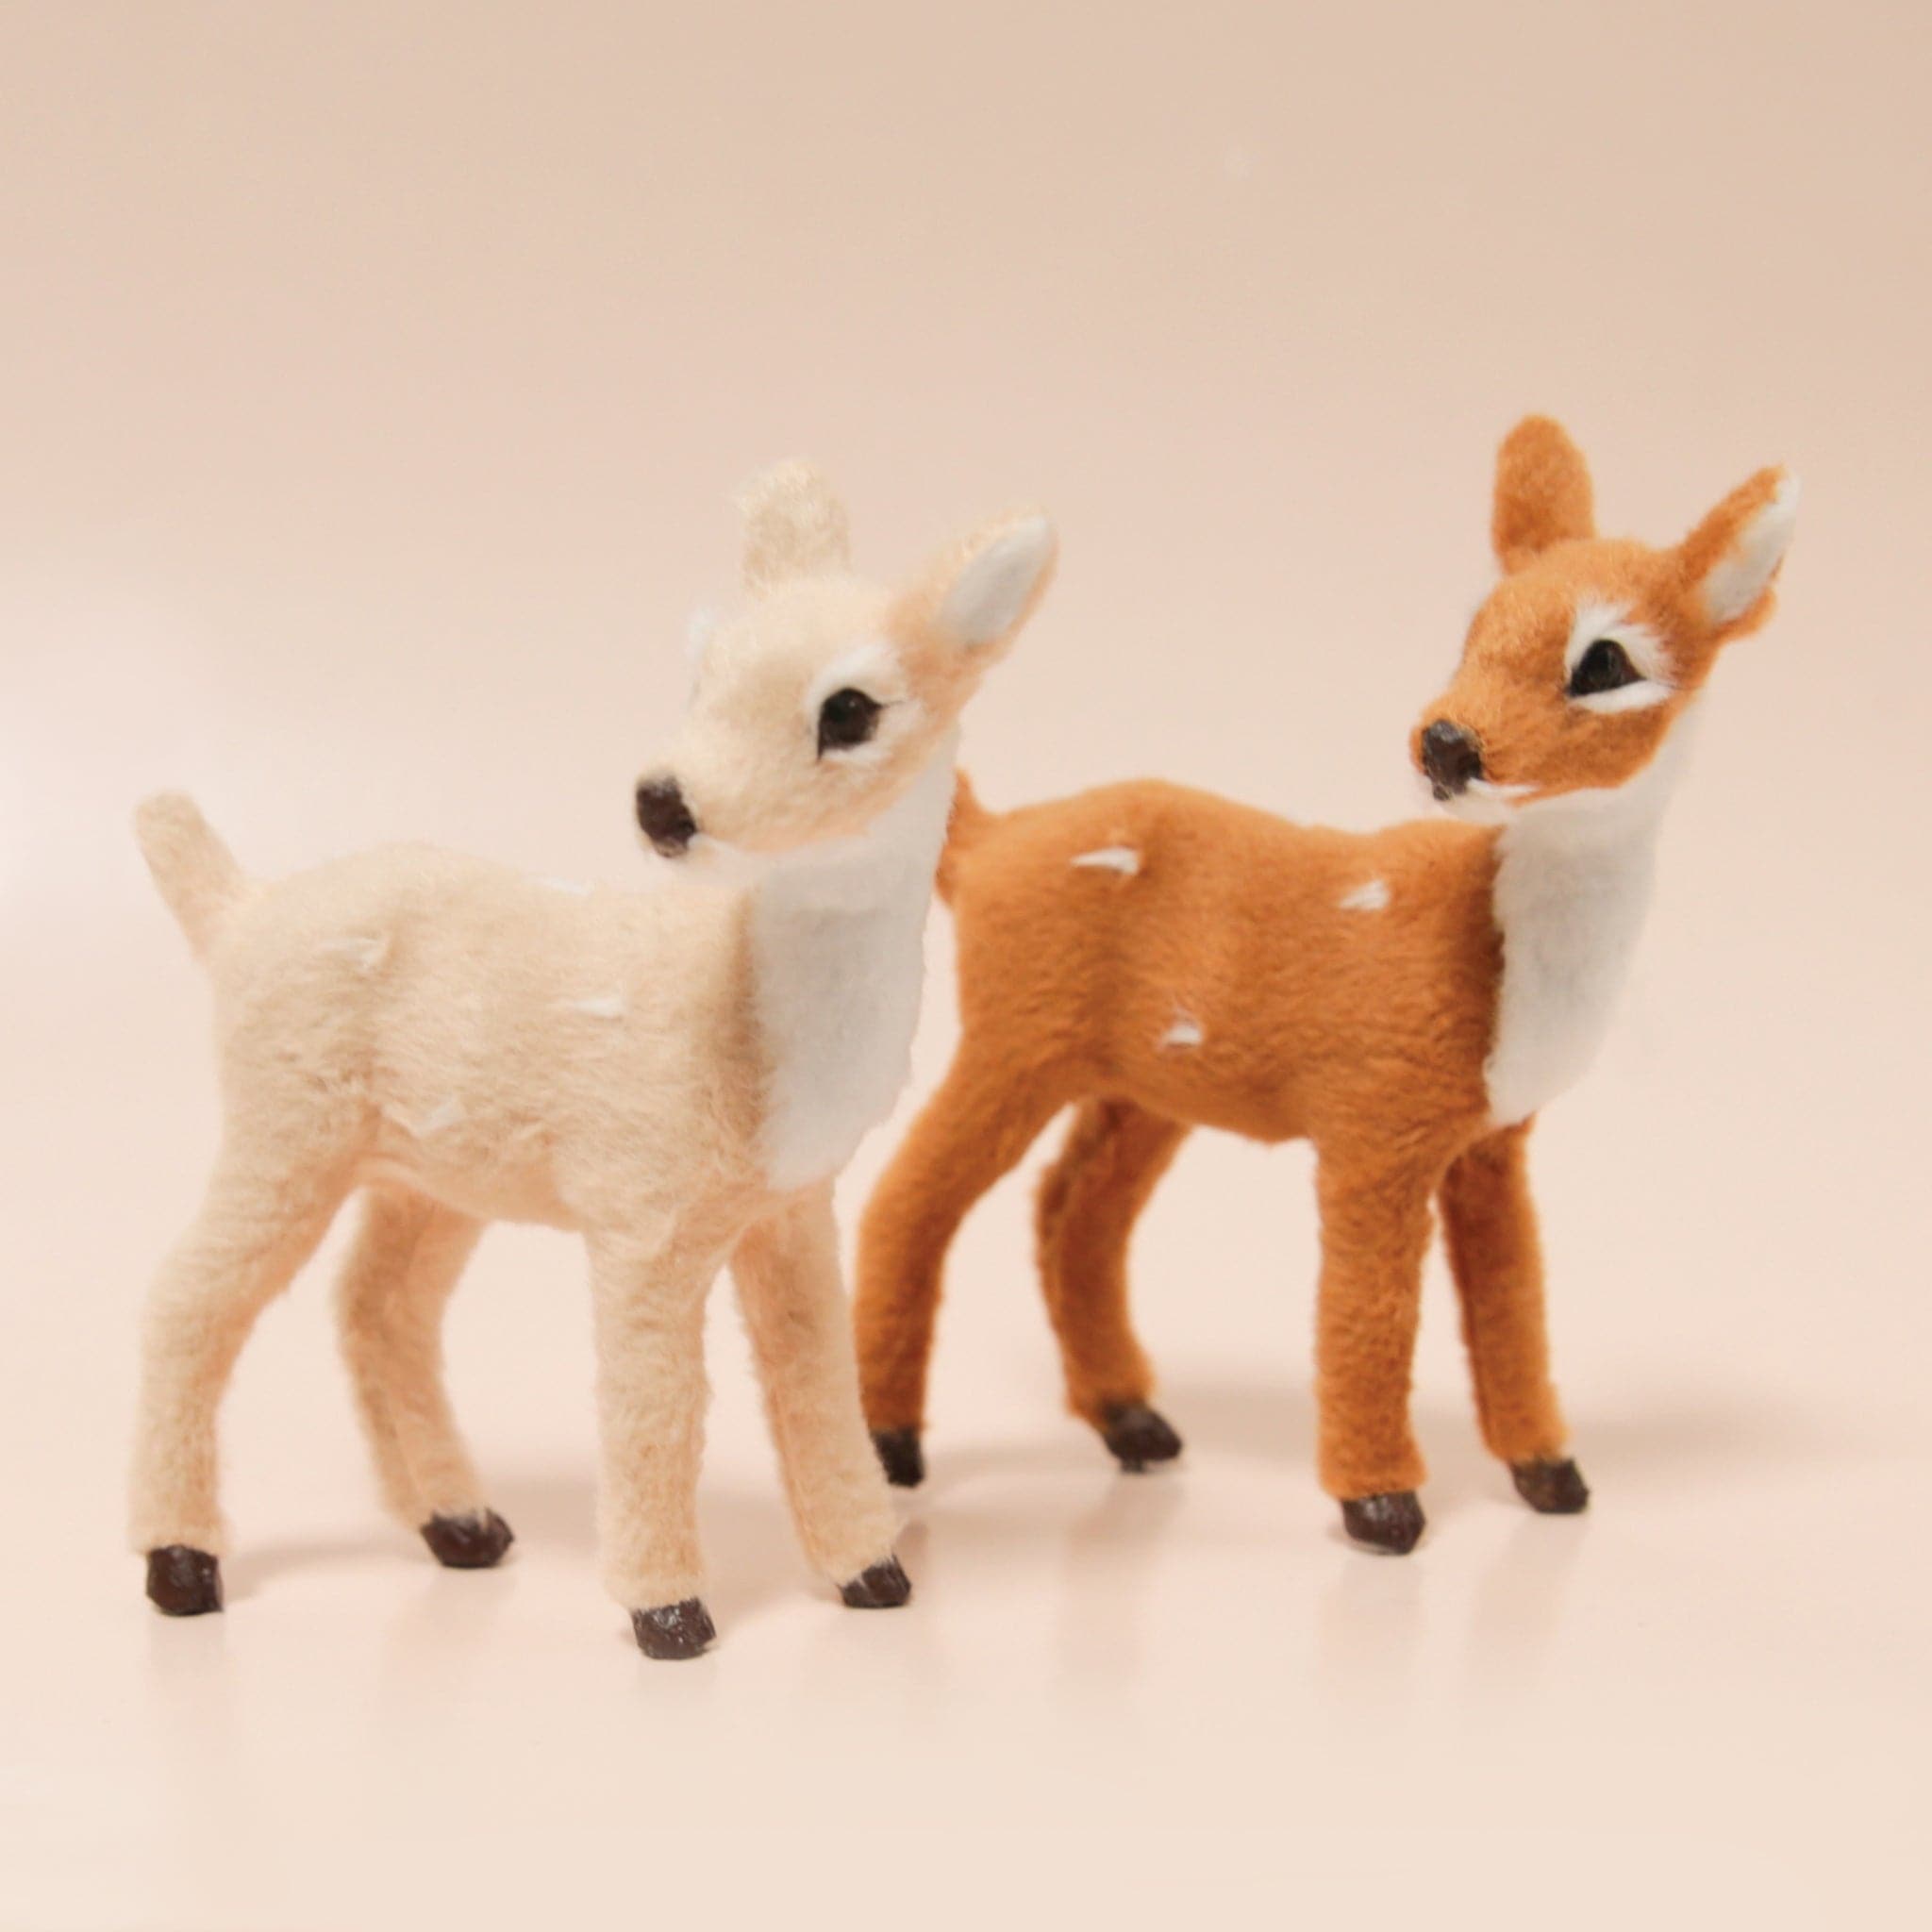 One cream and one brown reindeer fawn figures sit atop a peach background